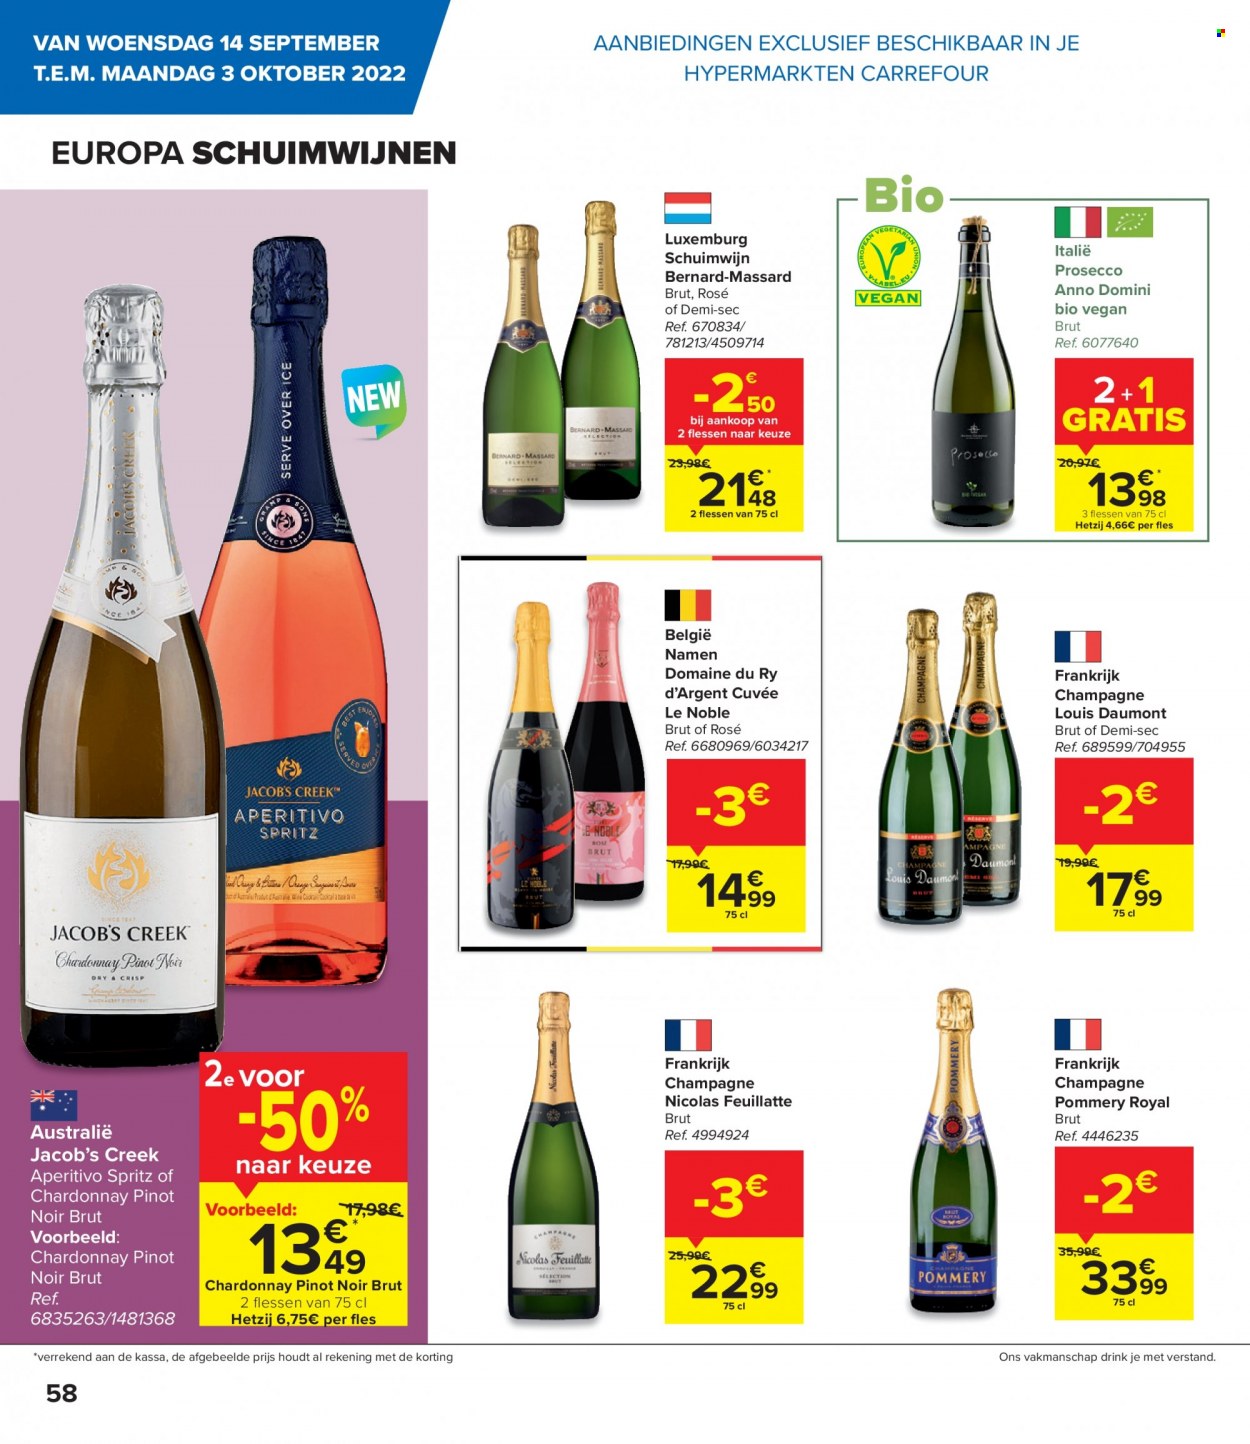 Catalogue Carrefour hypermarkt - 14.9.2022 - 3.10.2022. Page 28.